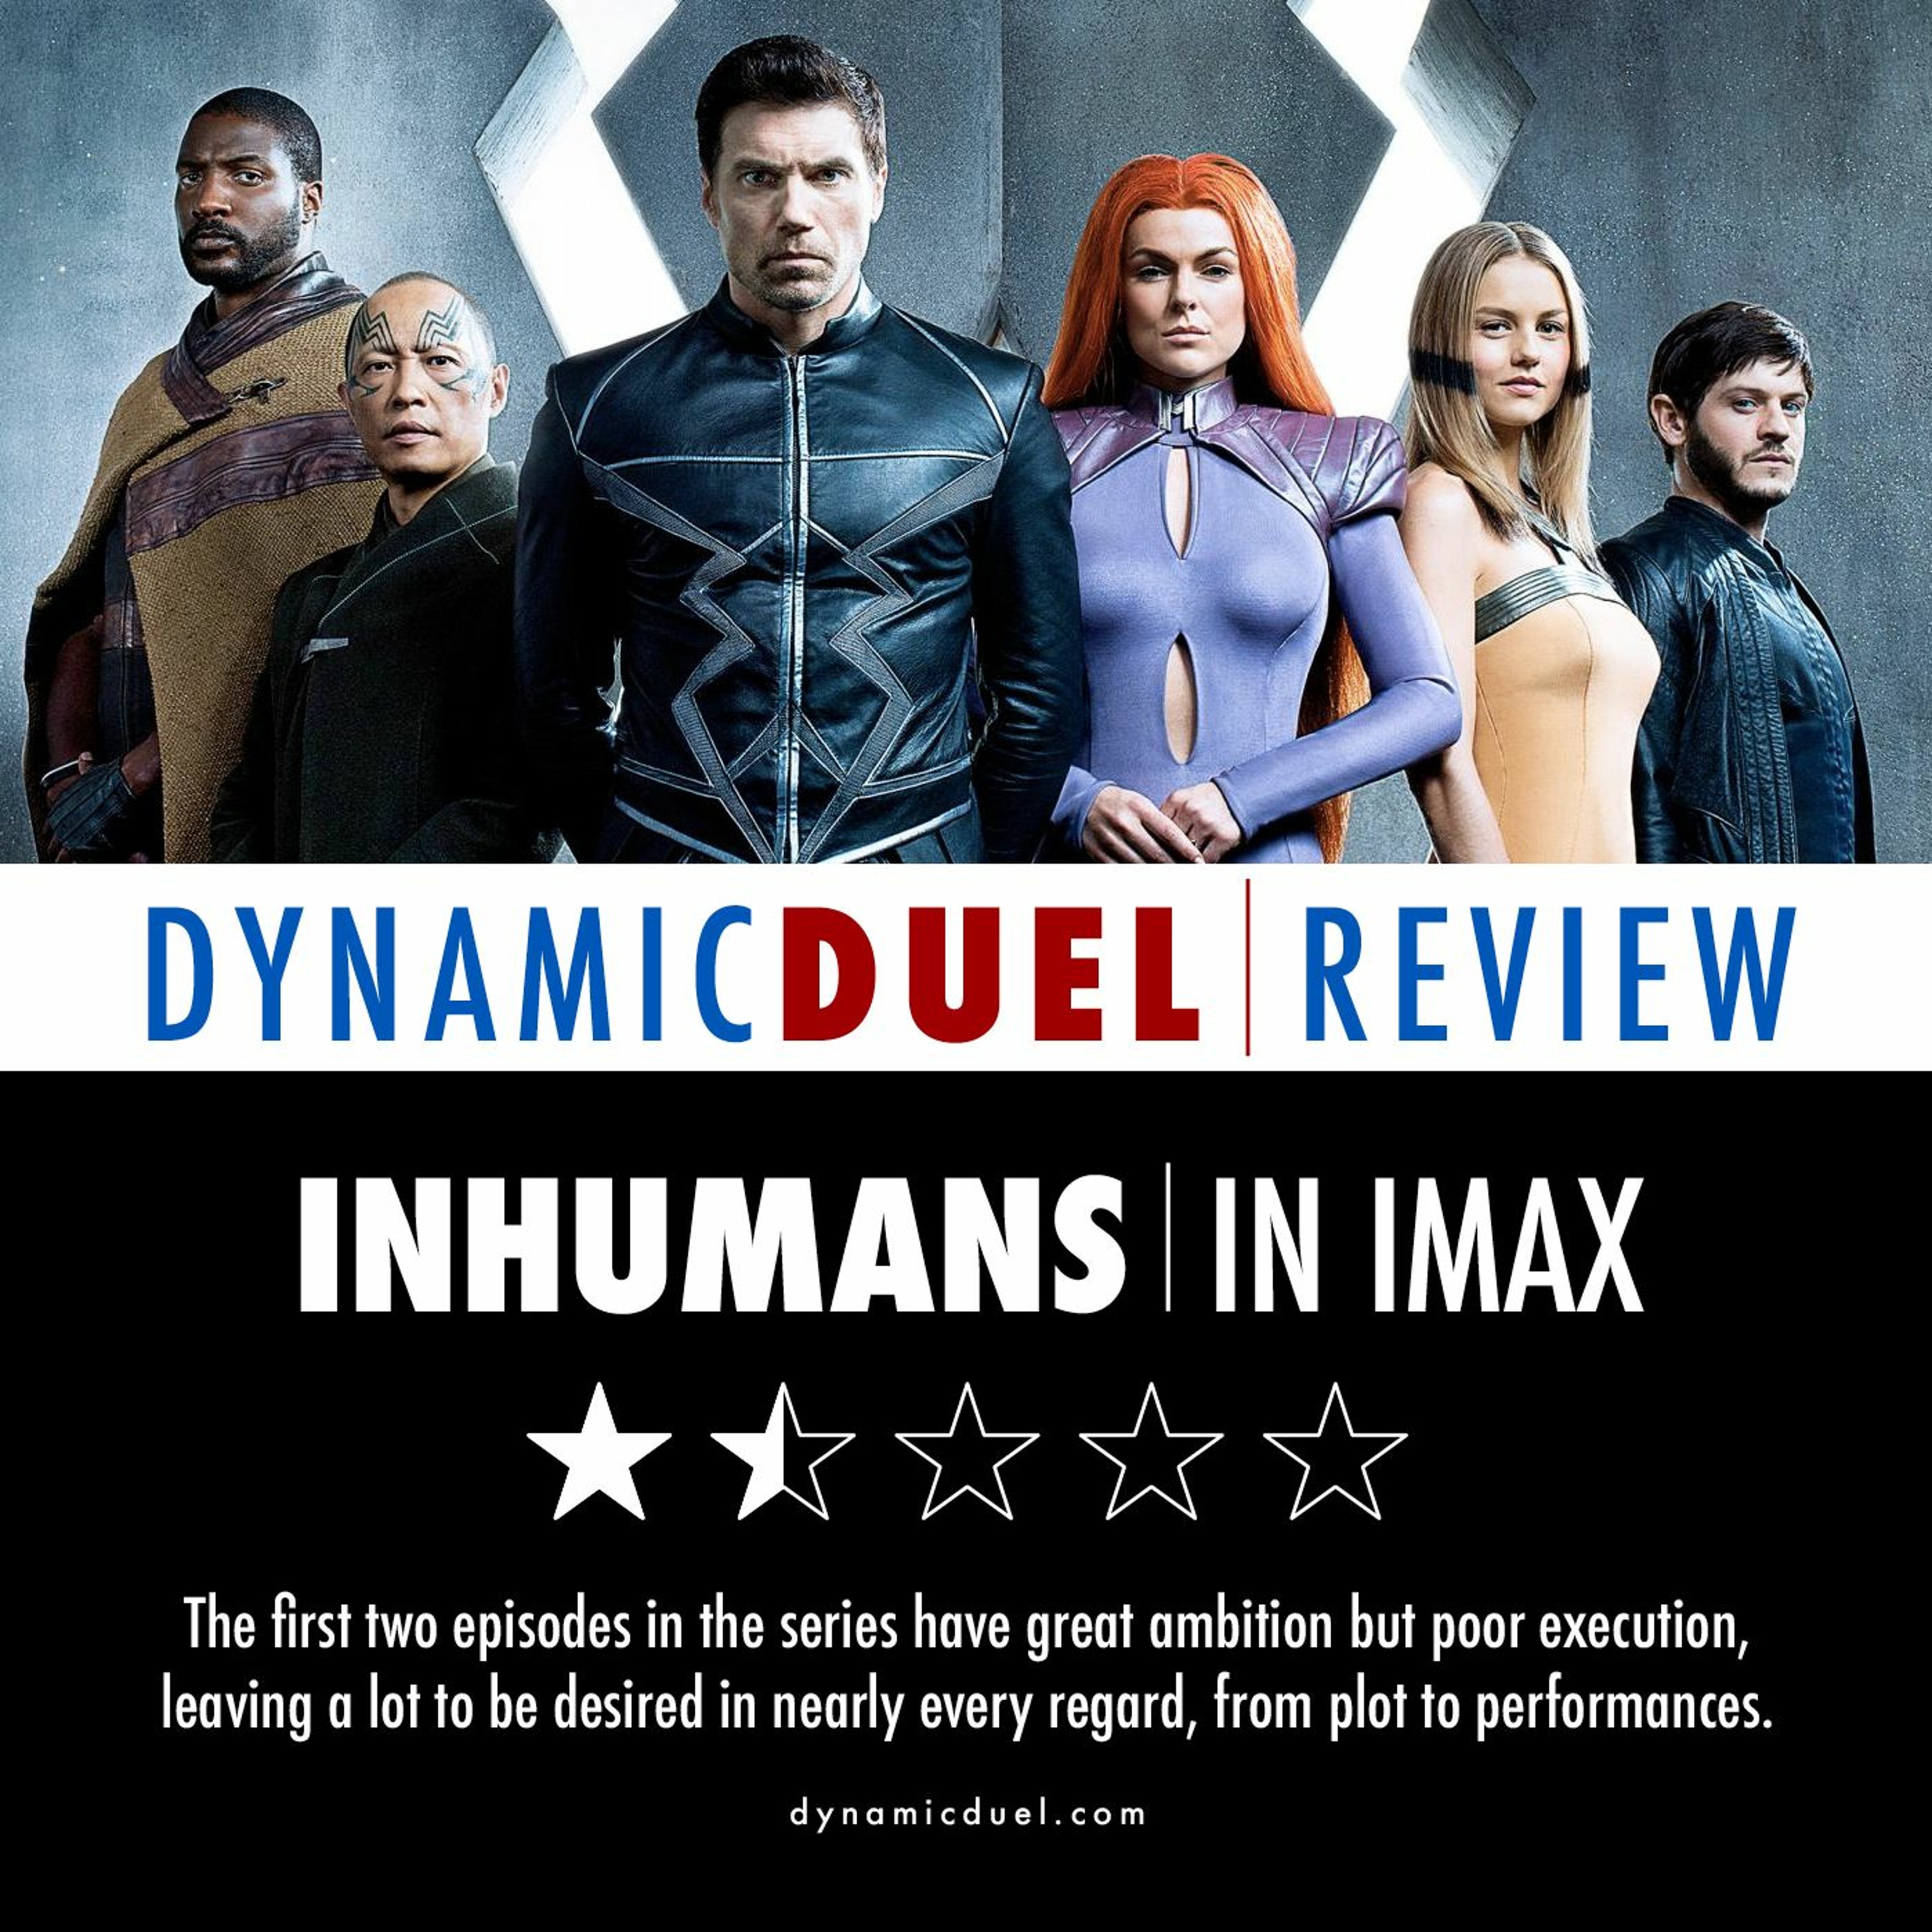 Inhumans in IMAX Review Image